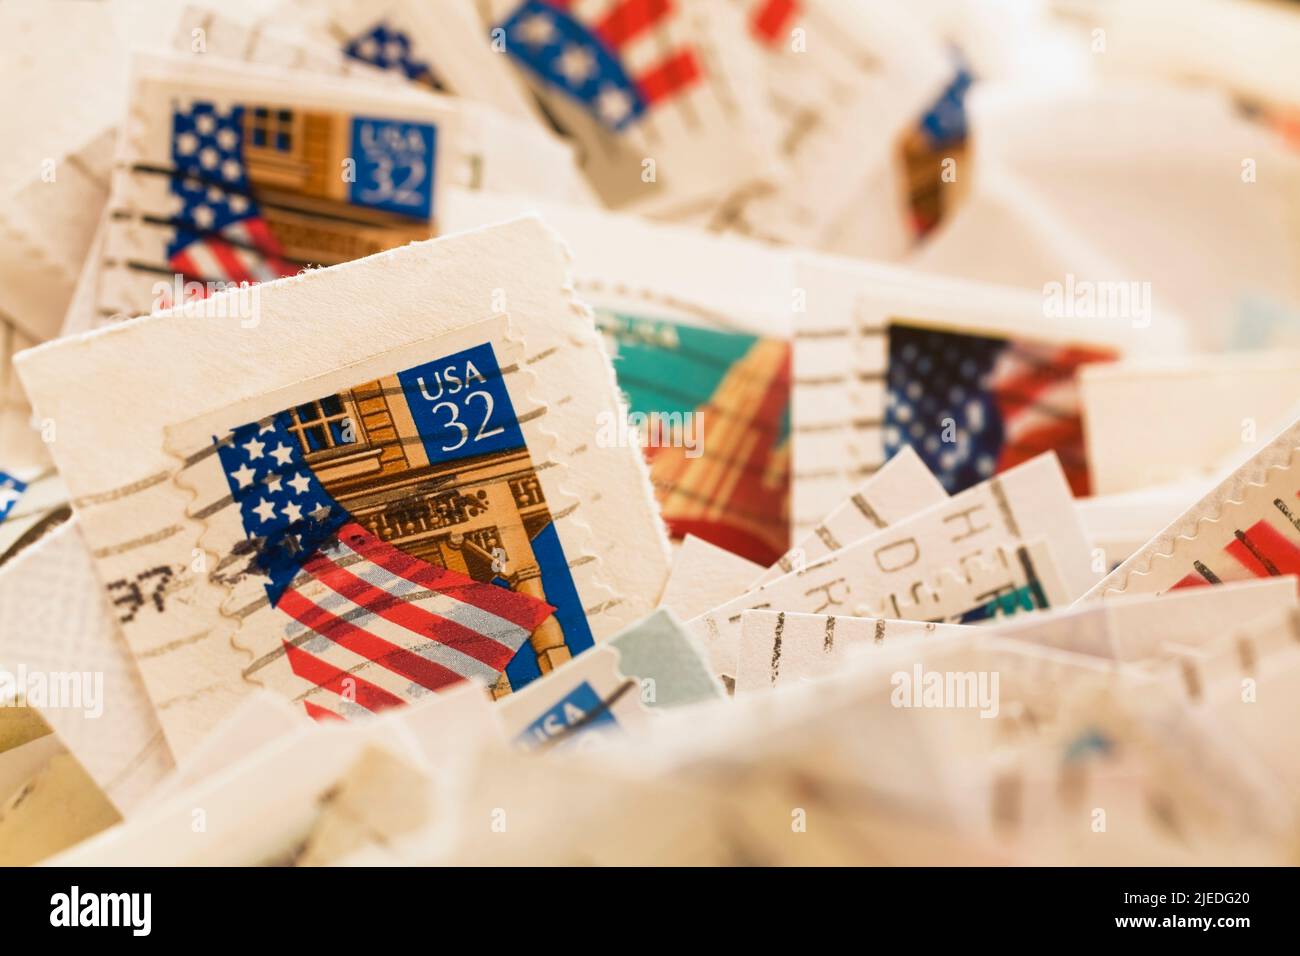 Close-up of old United States postage stamps commemorating the US flag. Stock Photo